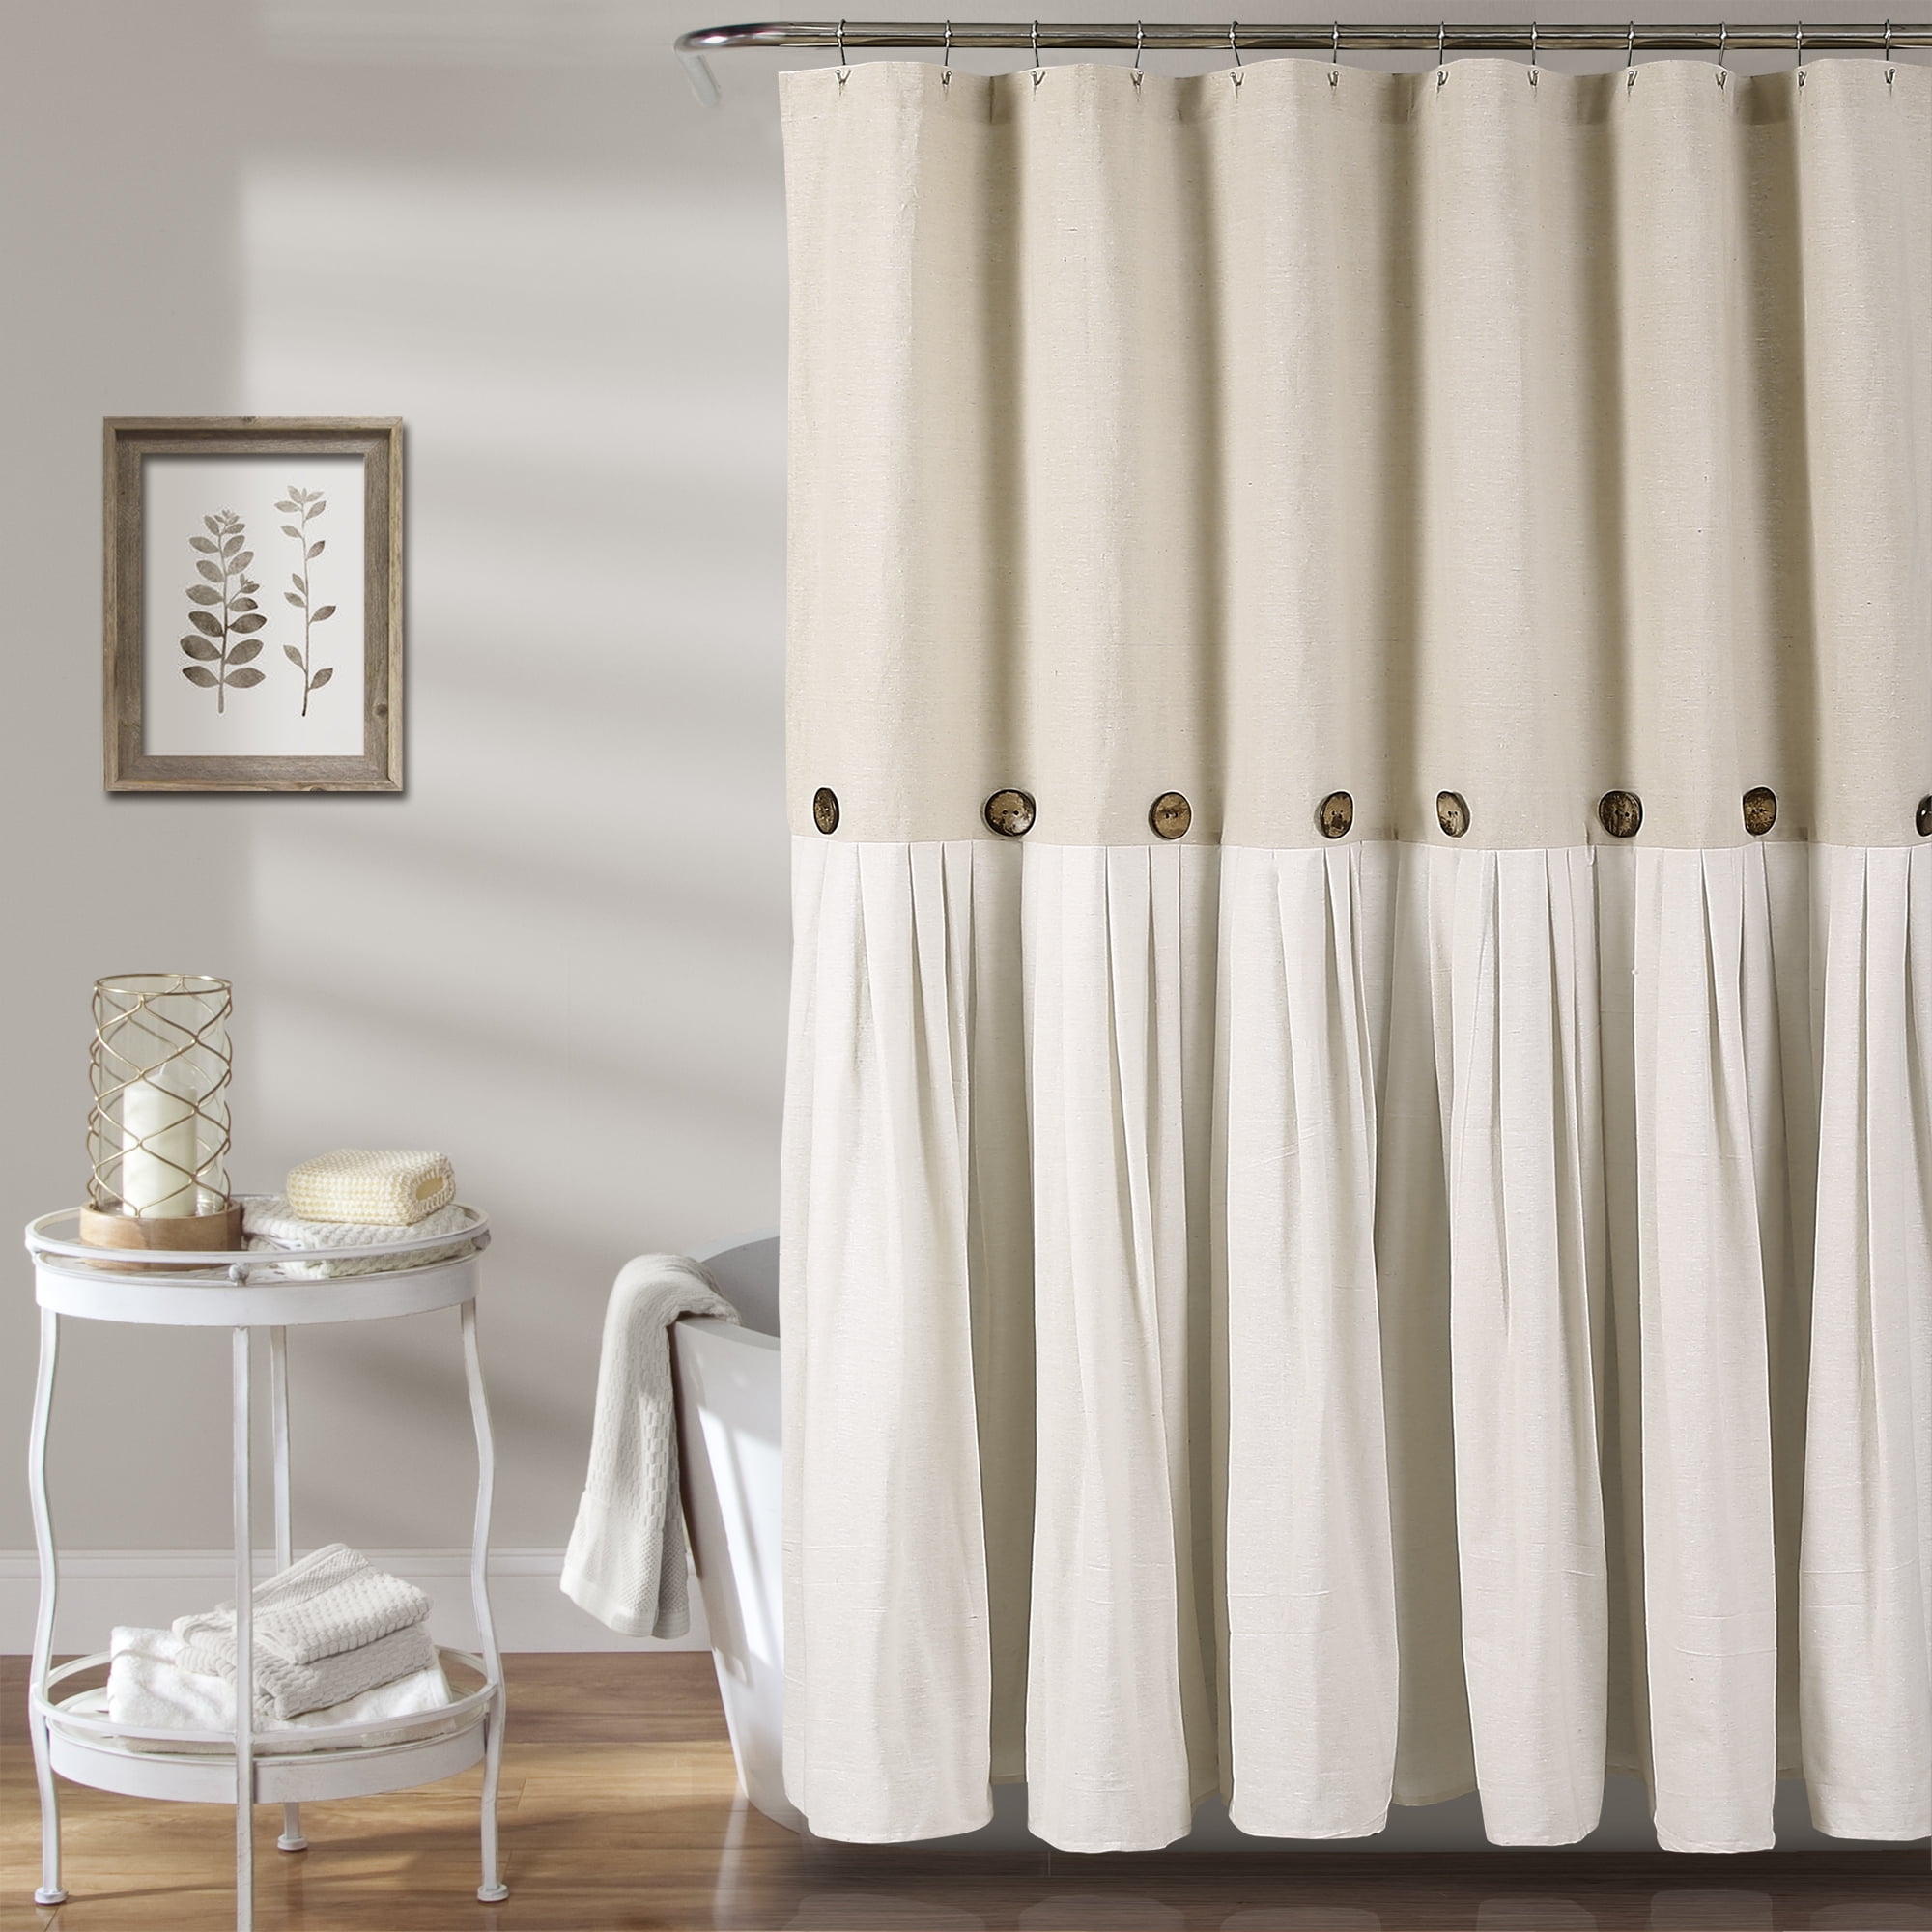 Details about   InterDesign York Hotel Fabric Cotton and Polyester Blend Shower Curtain 72 x 72 